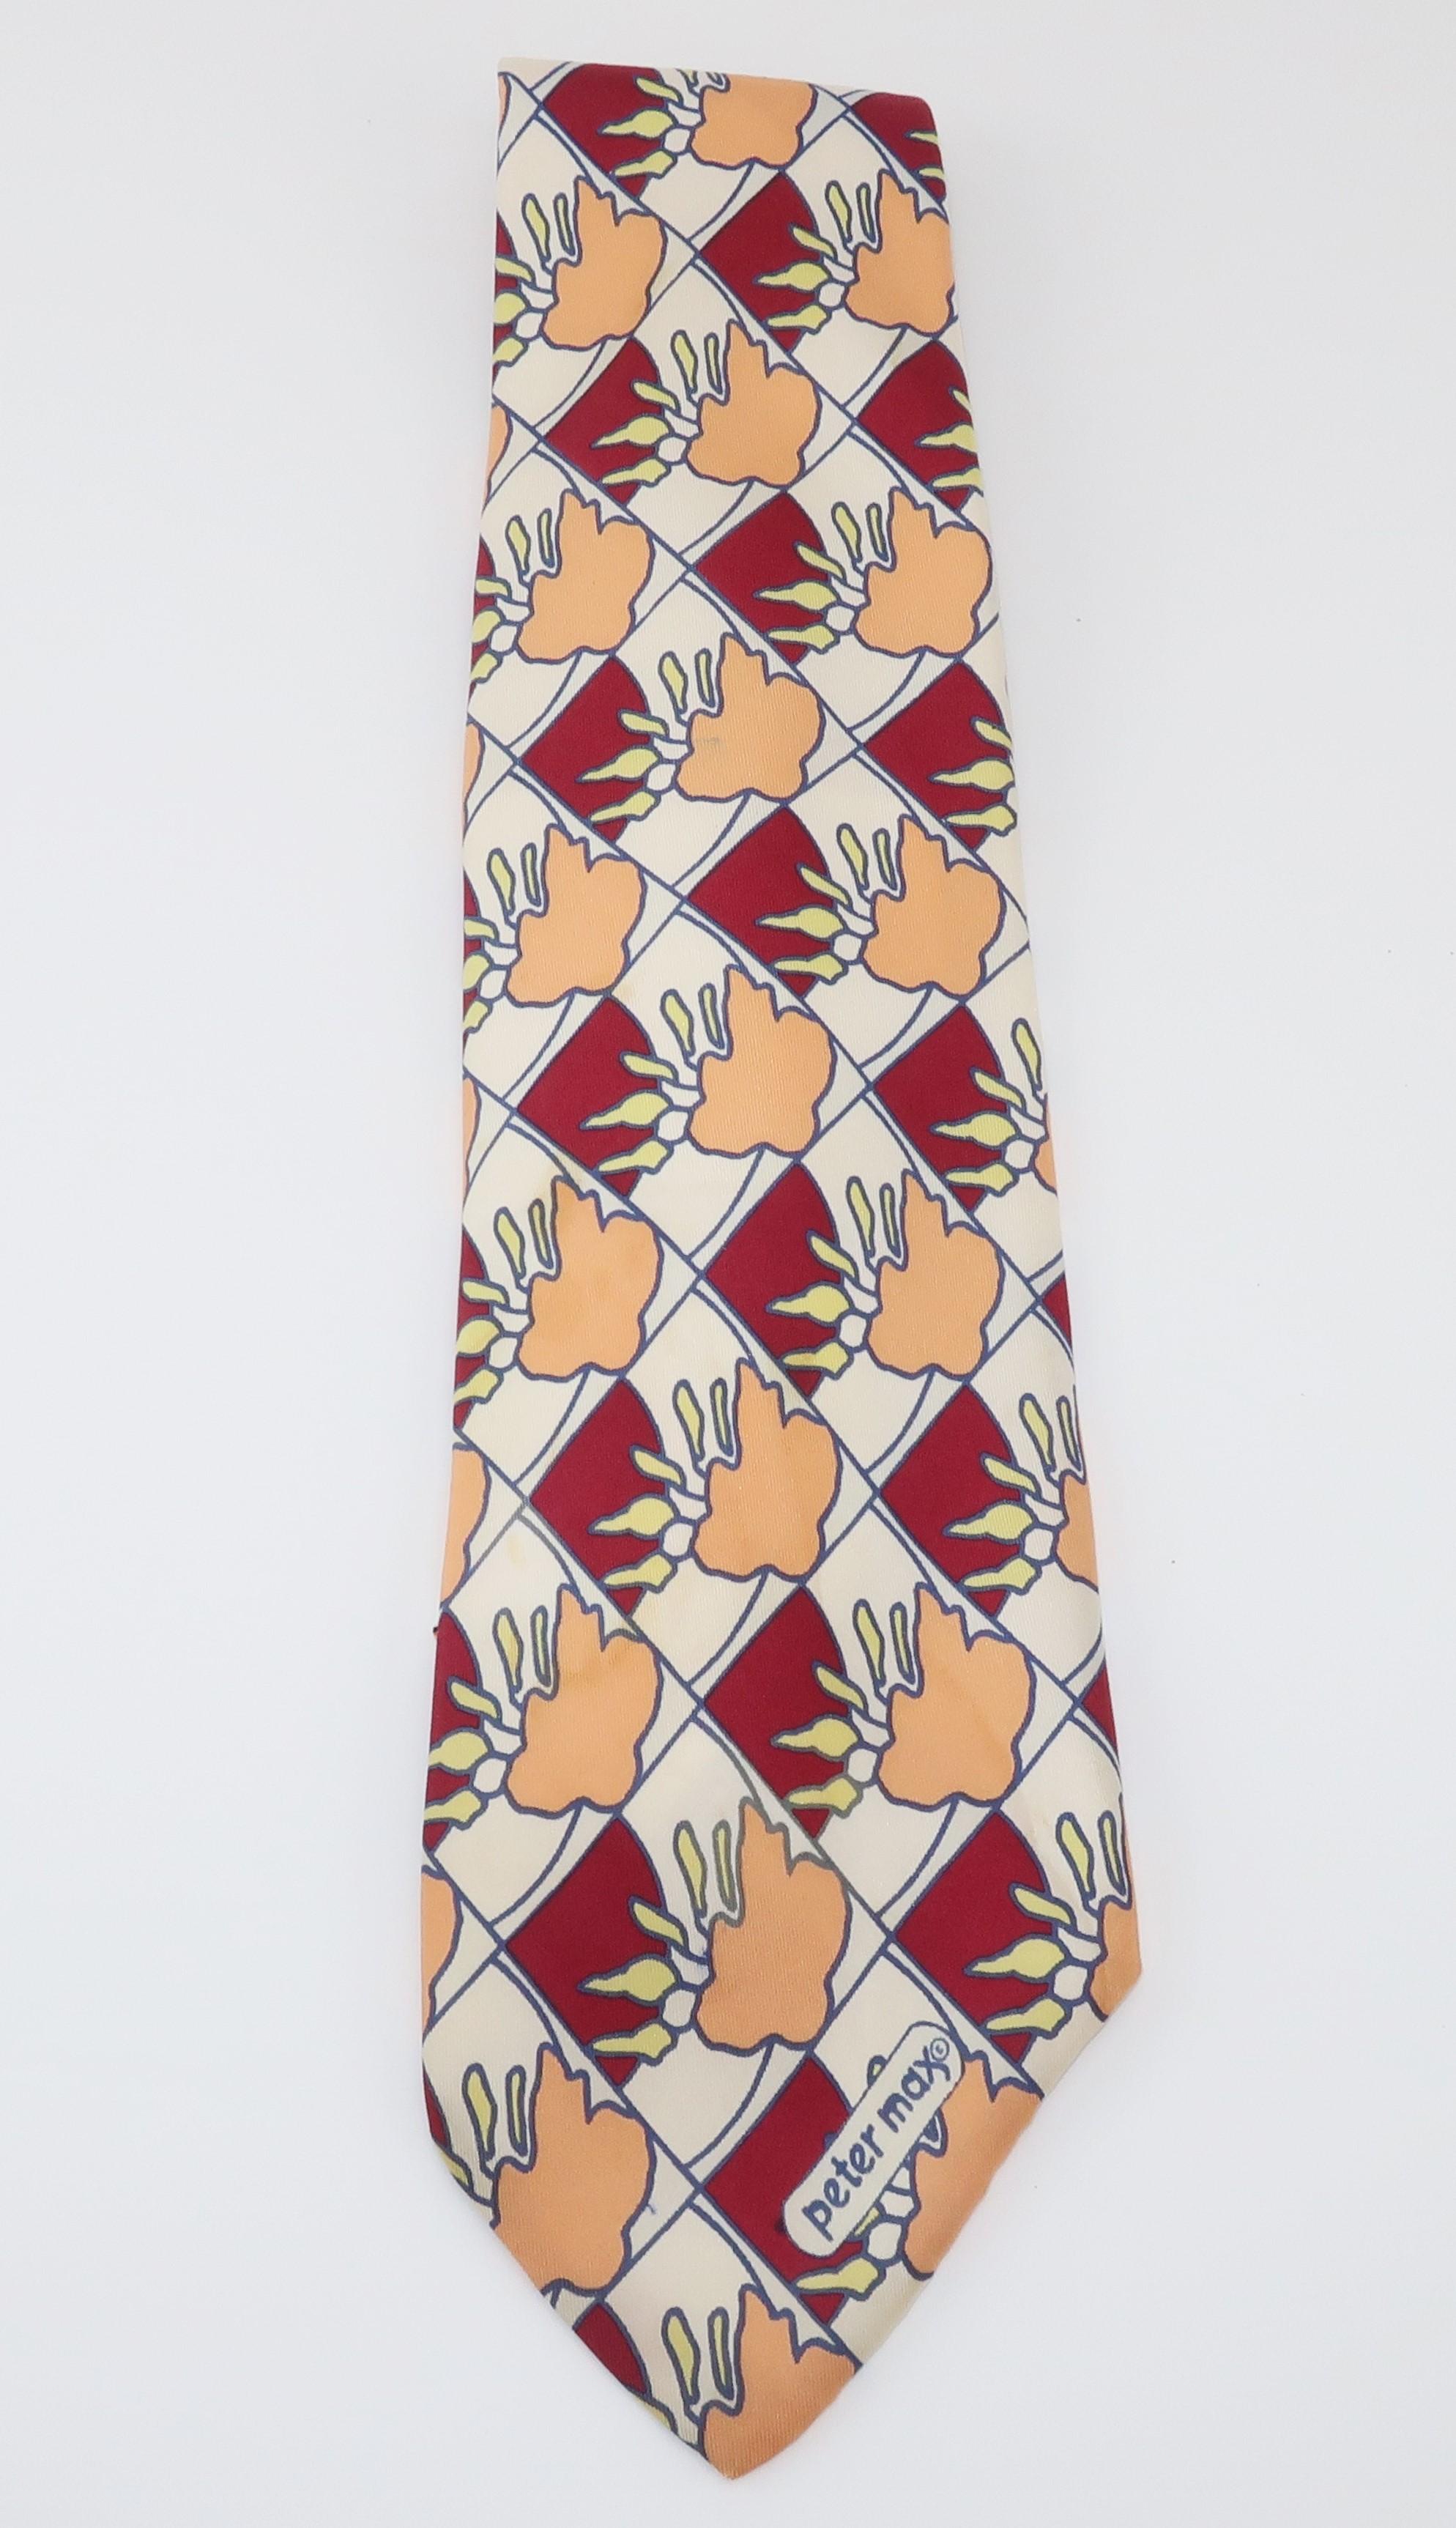 Peter Max made a name for himself in the 1960's by incorporating cultural influences of the psychedelic era into his pop art including wearable art such as this mod Italian silk necktie.  The colorful pattern includes shades of maroon red, blue,